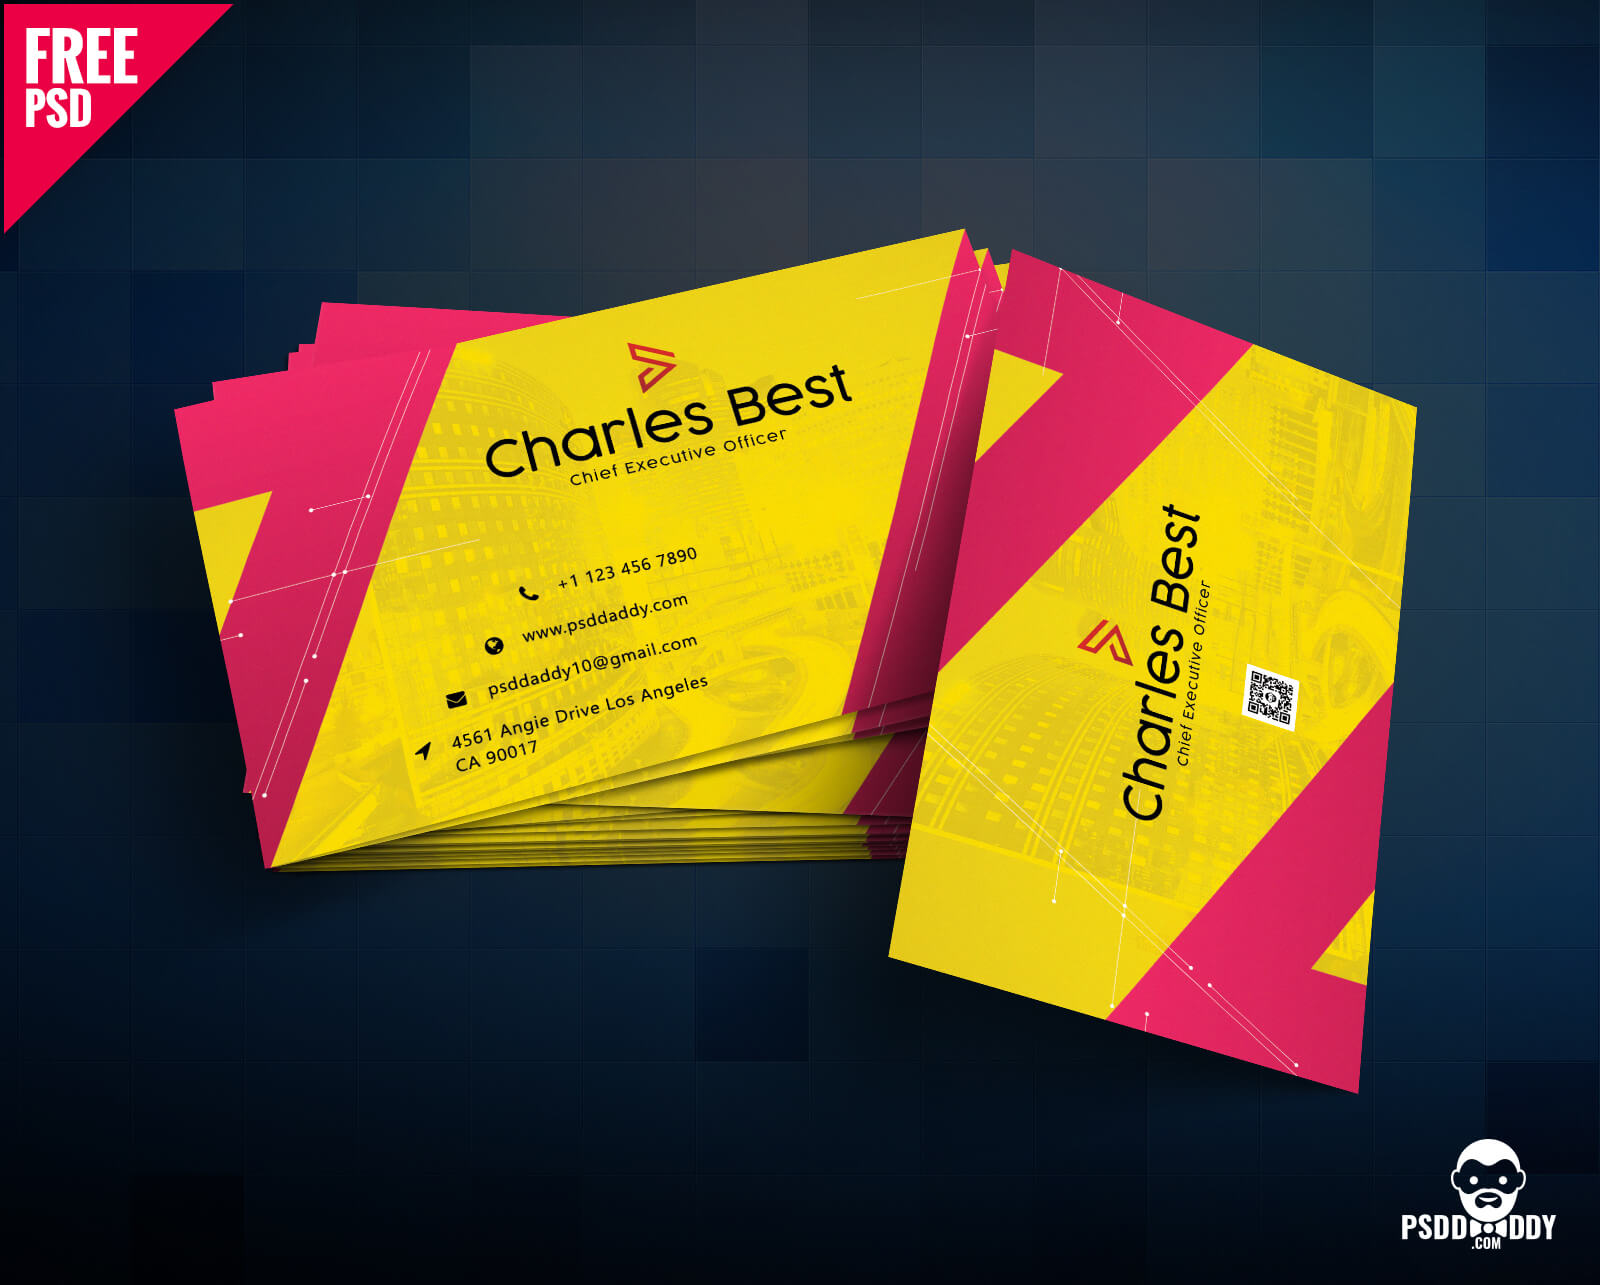 Download] Creative Business Card Free Psd | Psddaddy With Regard To Iphone Business Card Template